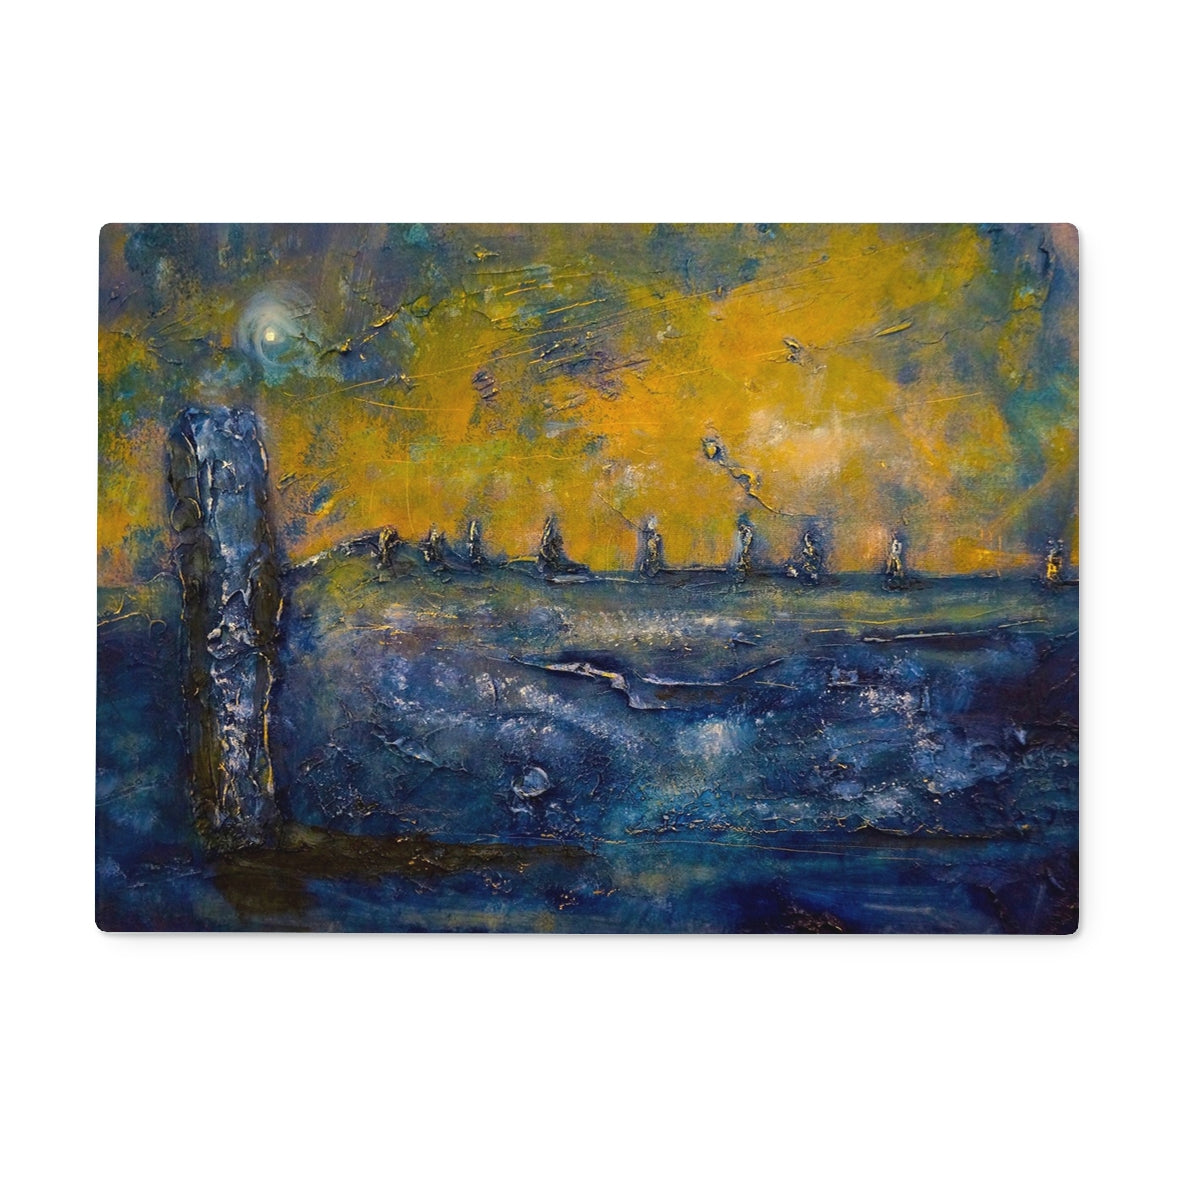 Brodgar Moonlight Orkney Art Gifts Glass Chopping Board-Glass Chopping Boards-Orkney Art Gallery-15"x11" Rectangular-Paintings, Prints, Homeware, Art Gifts From Scotland By Scottish Artist Kevin Hunter